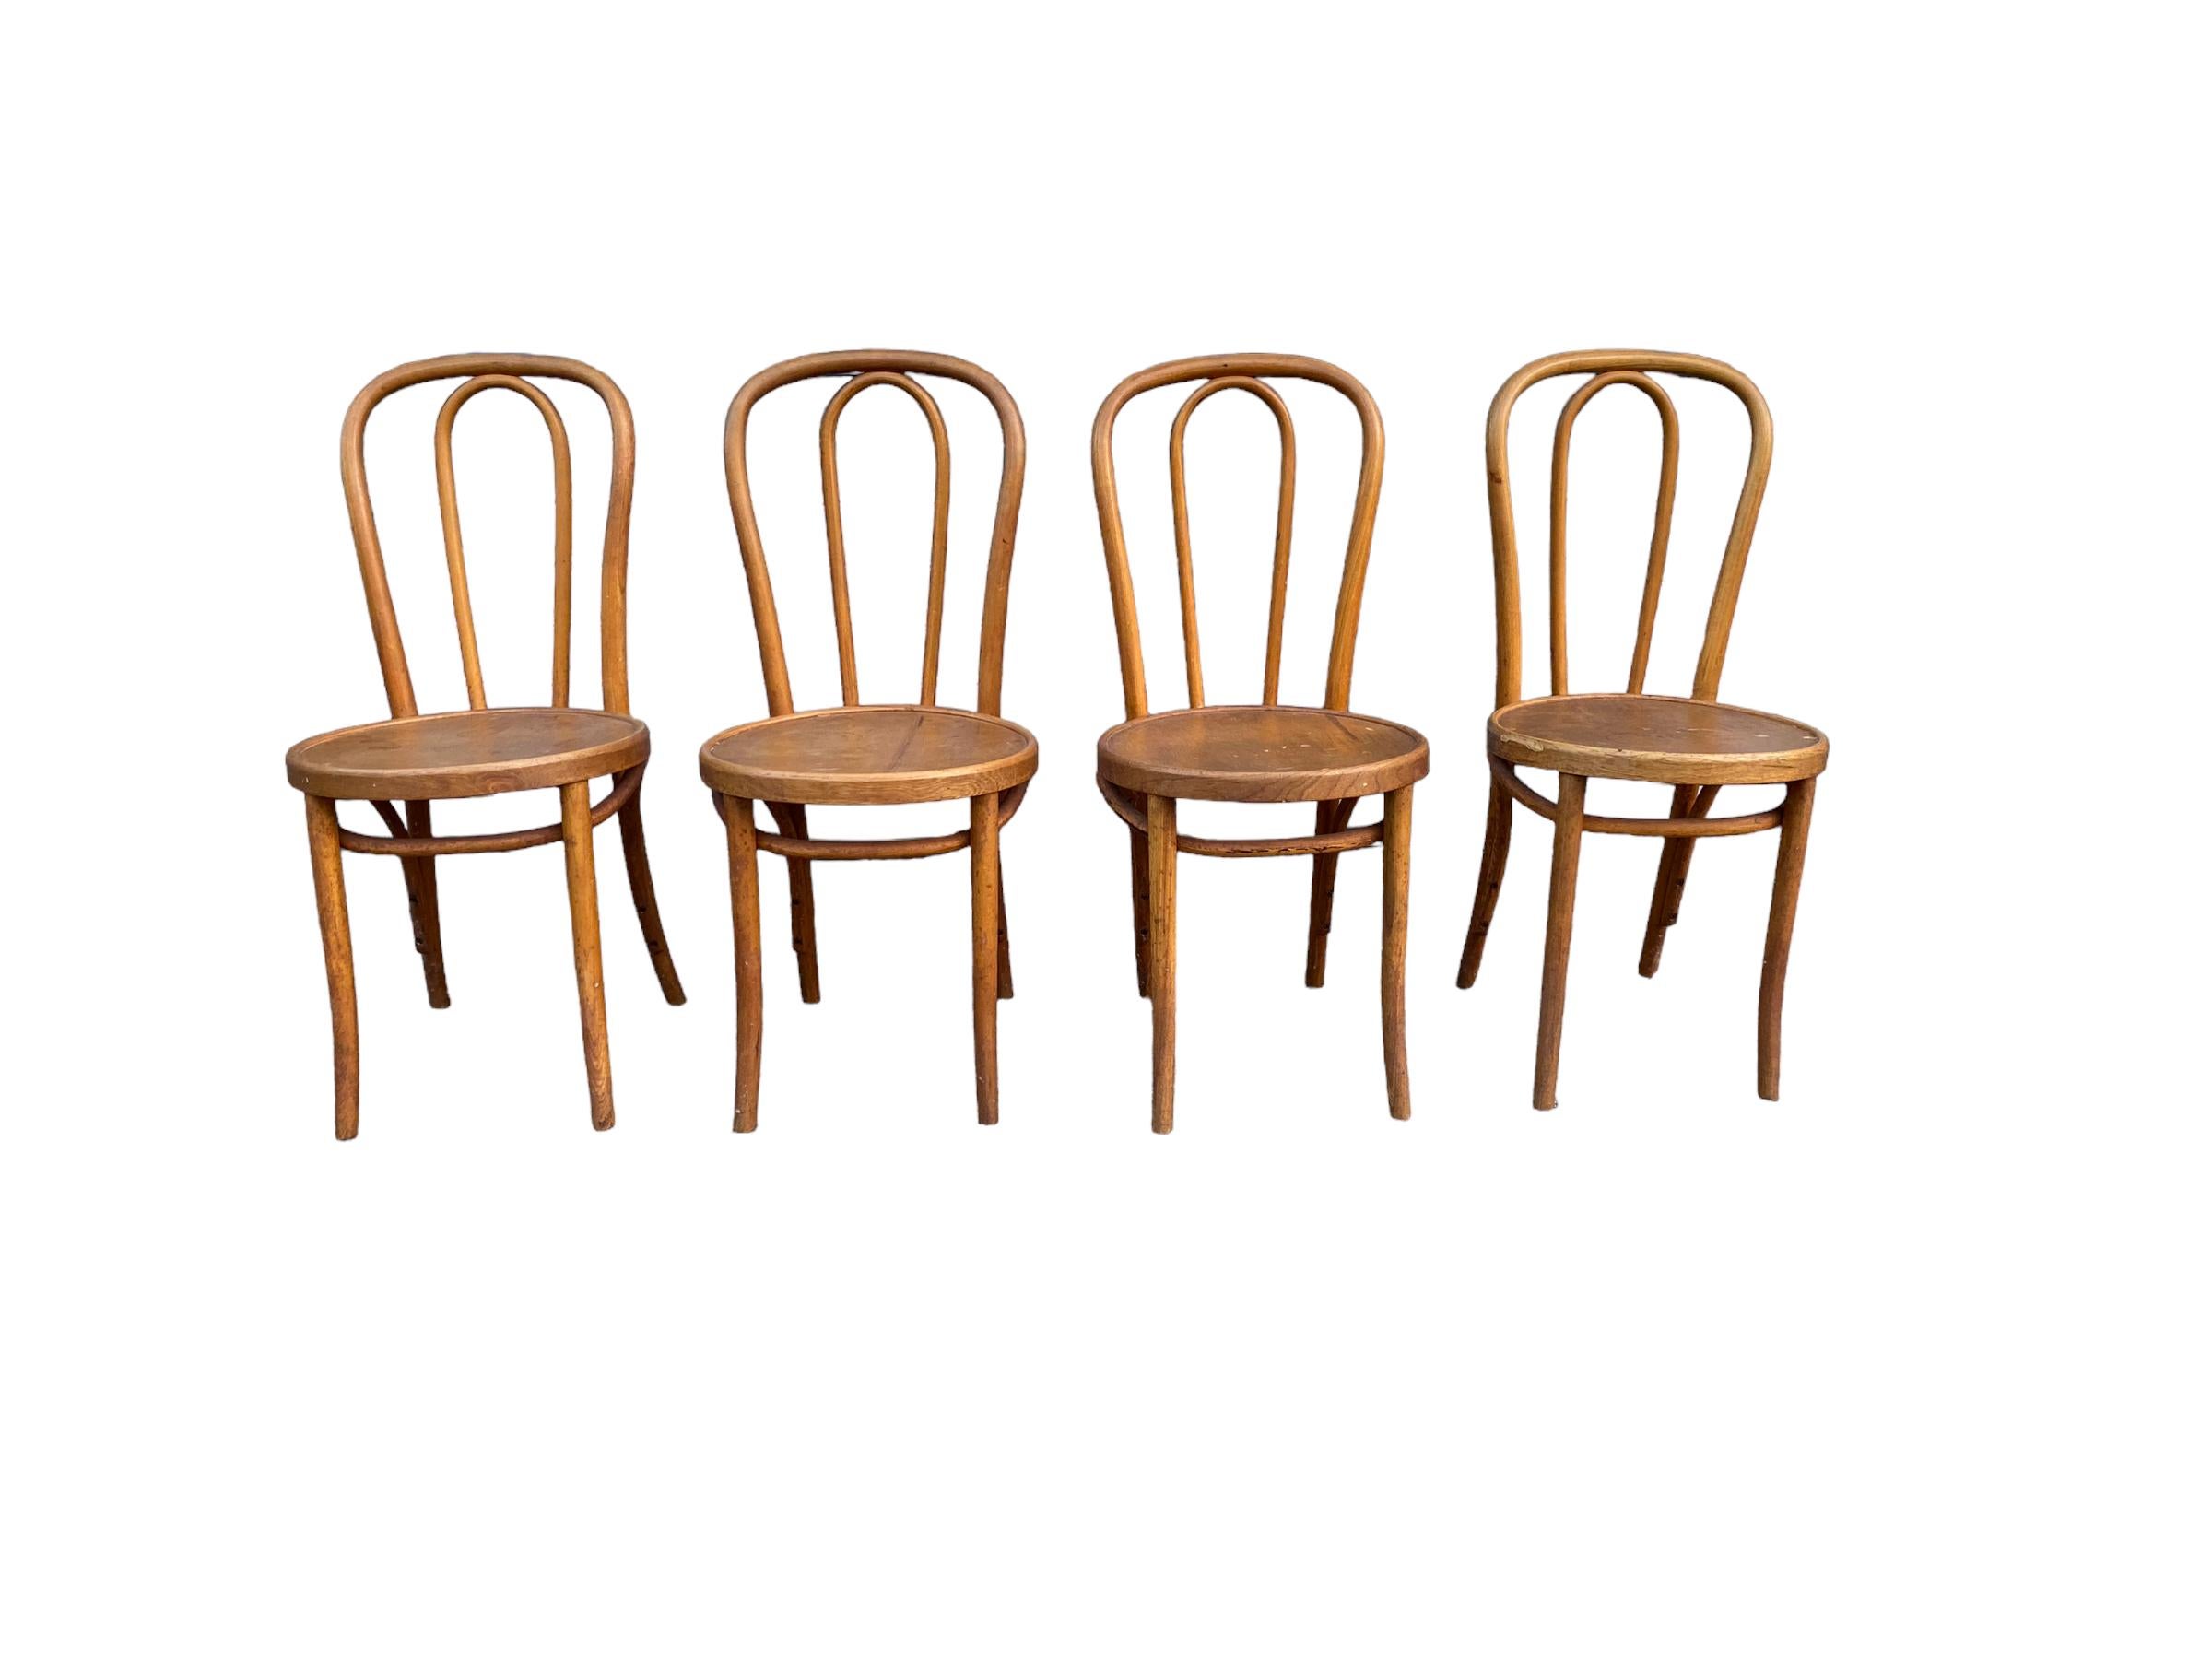 Set of Thonet Bentwood bistro chairs. This set of bentwood beech wood chairs feature curved back and legs with a solid circular seat in original honey brown finish. With beautiful patina and age, these chairs carry on the tradition and beauty of